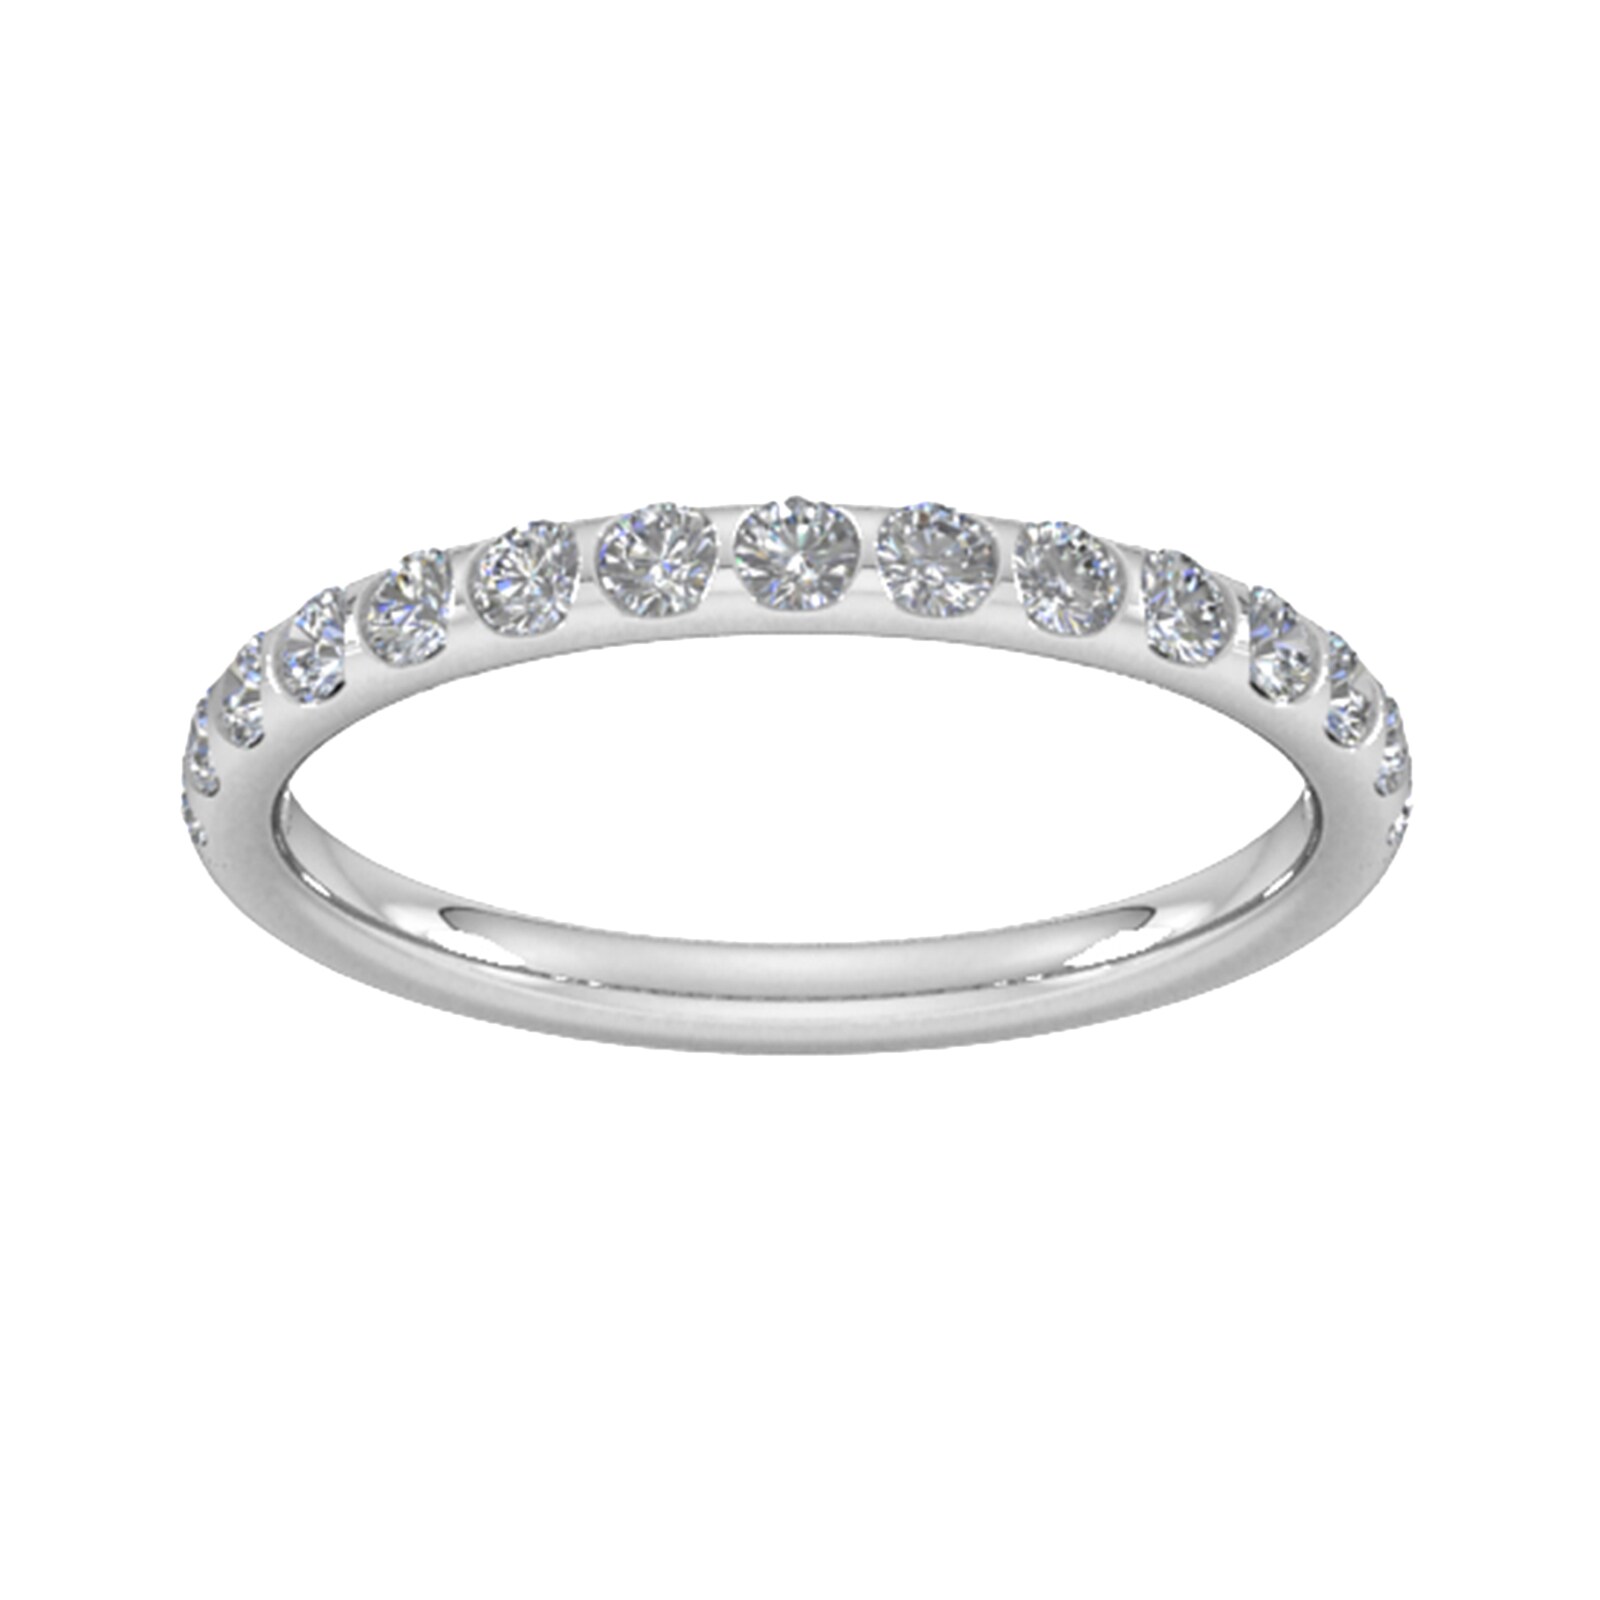 0.53 Carat Total Weight Curved Bar Brilliant Cut Diamond Set Wedding Ring In Platinum - Ring Size H